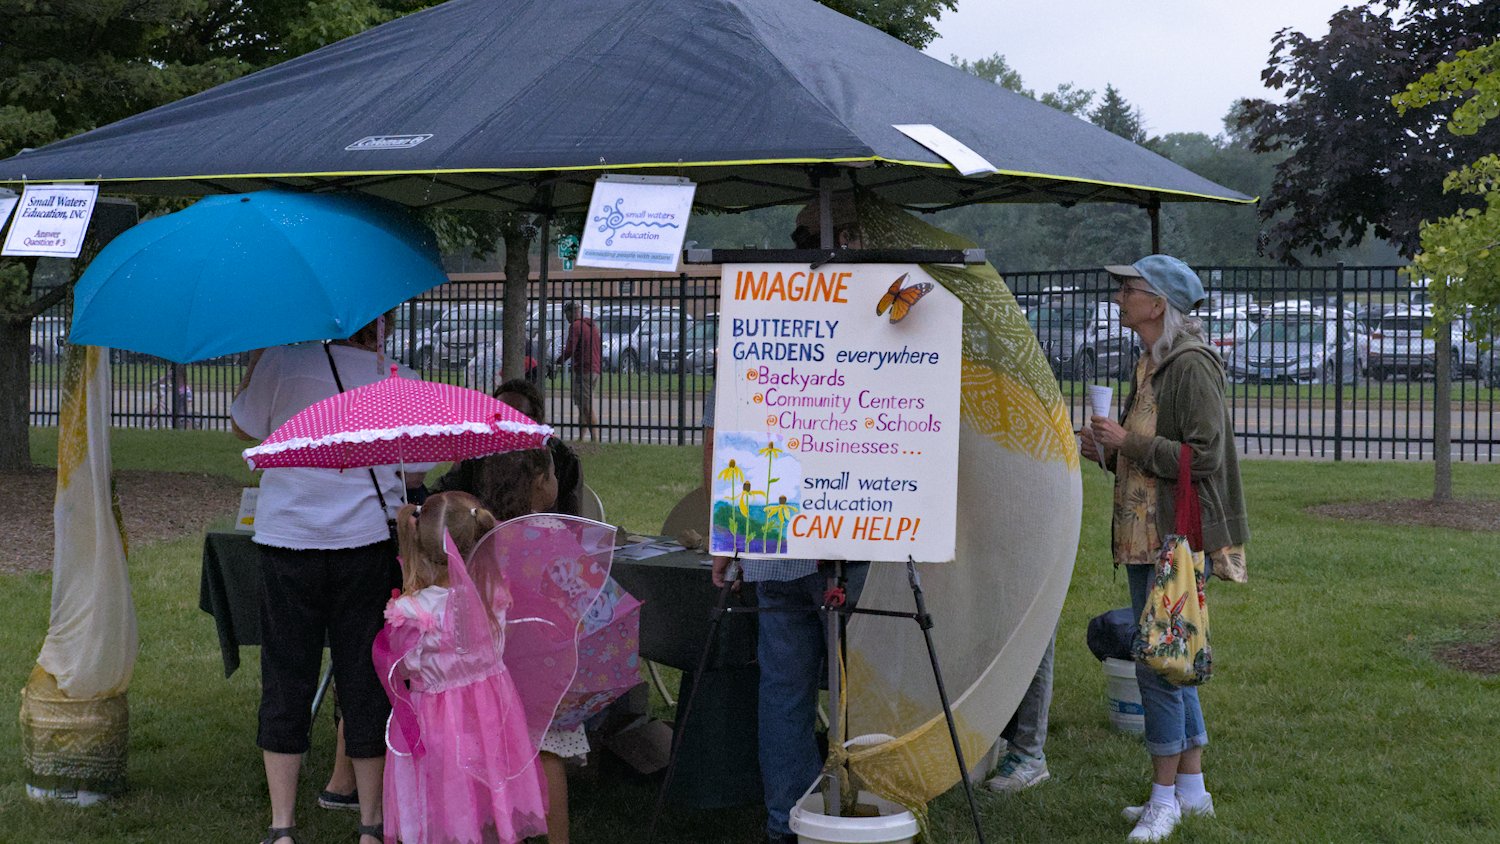 Small Waters Education tent.